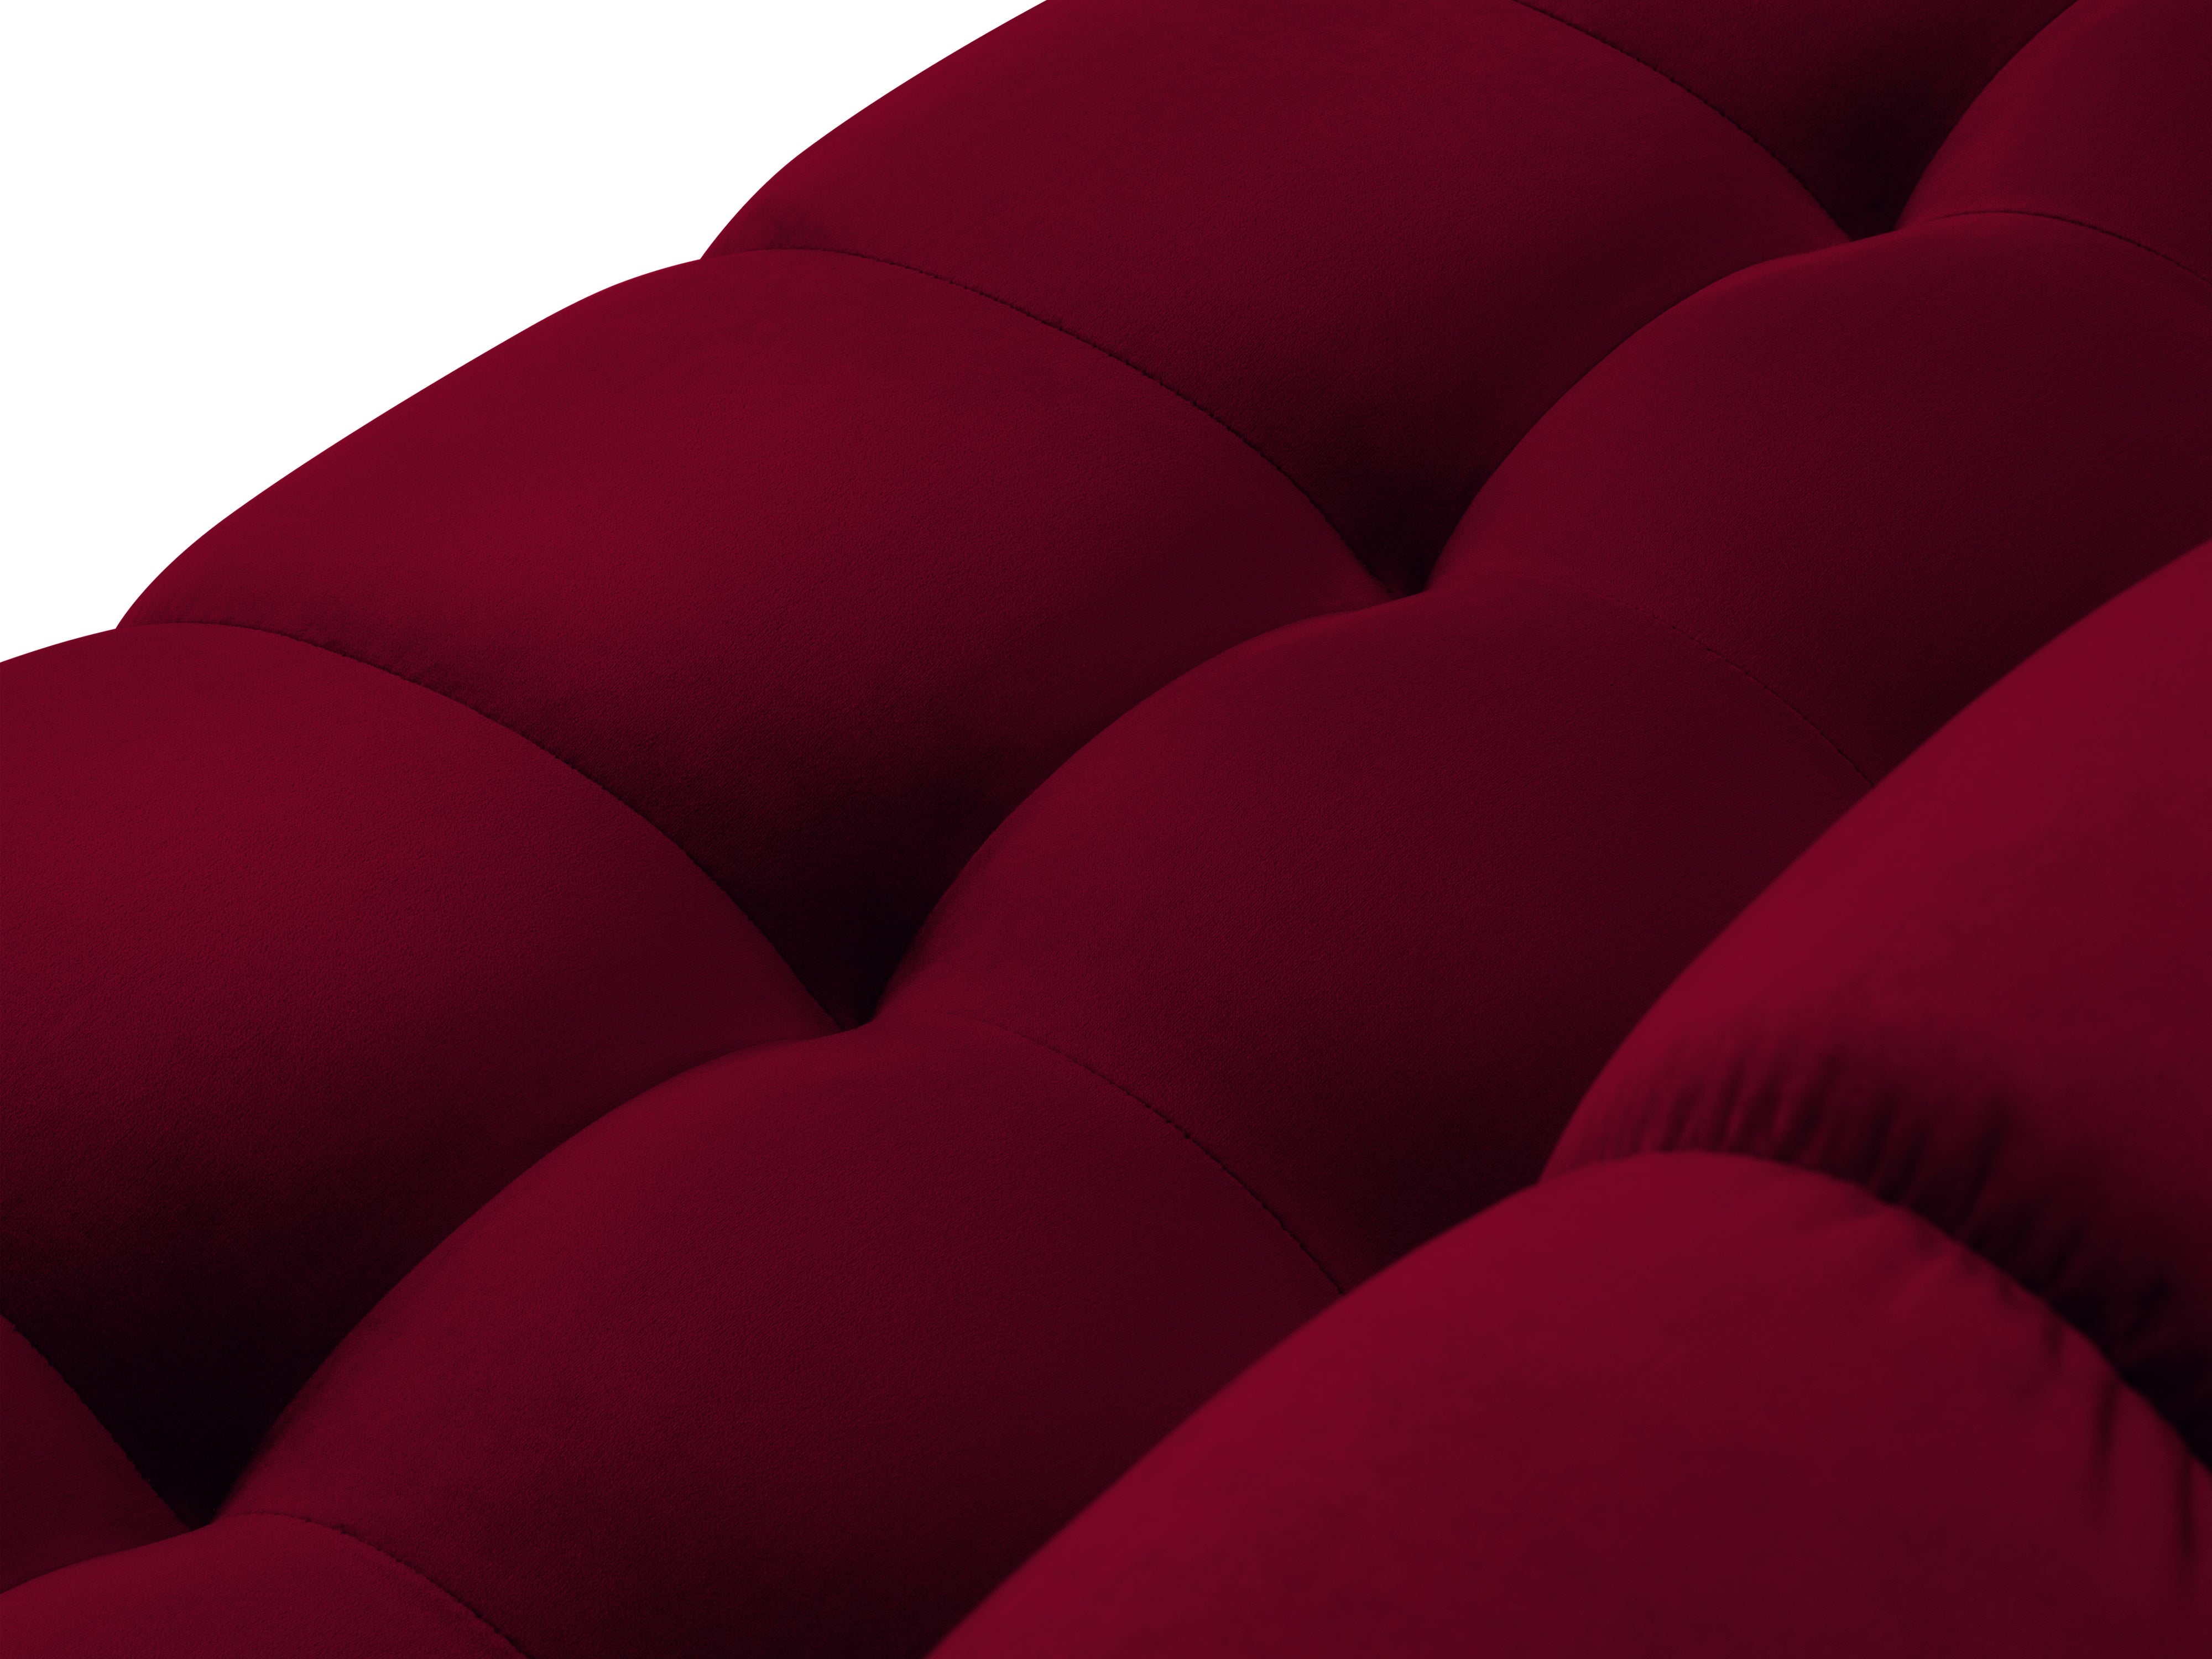 quilted velvet red seat